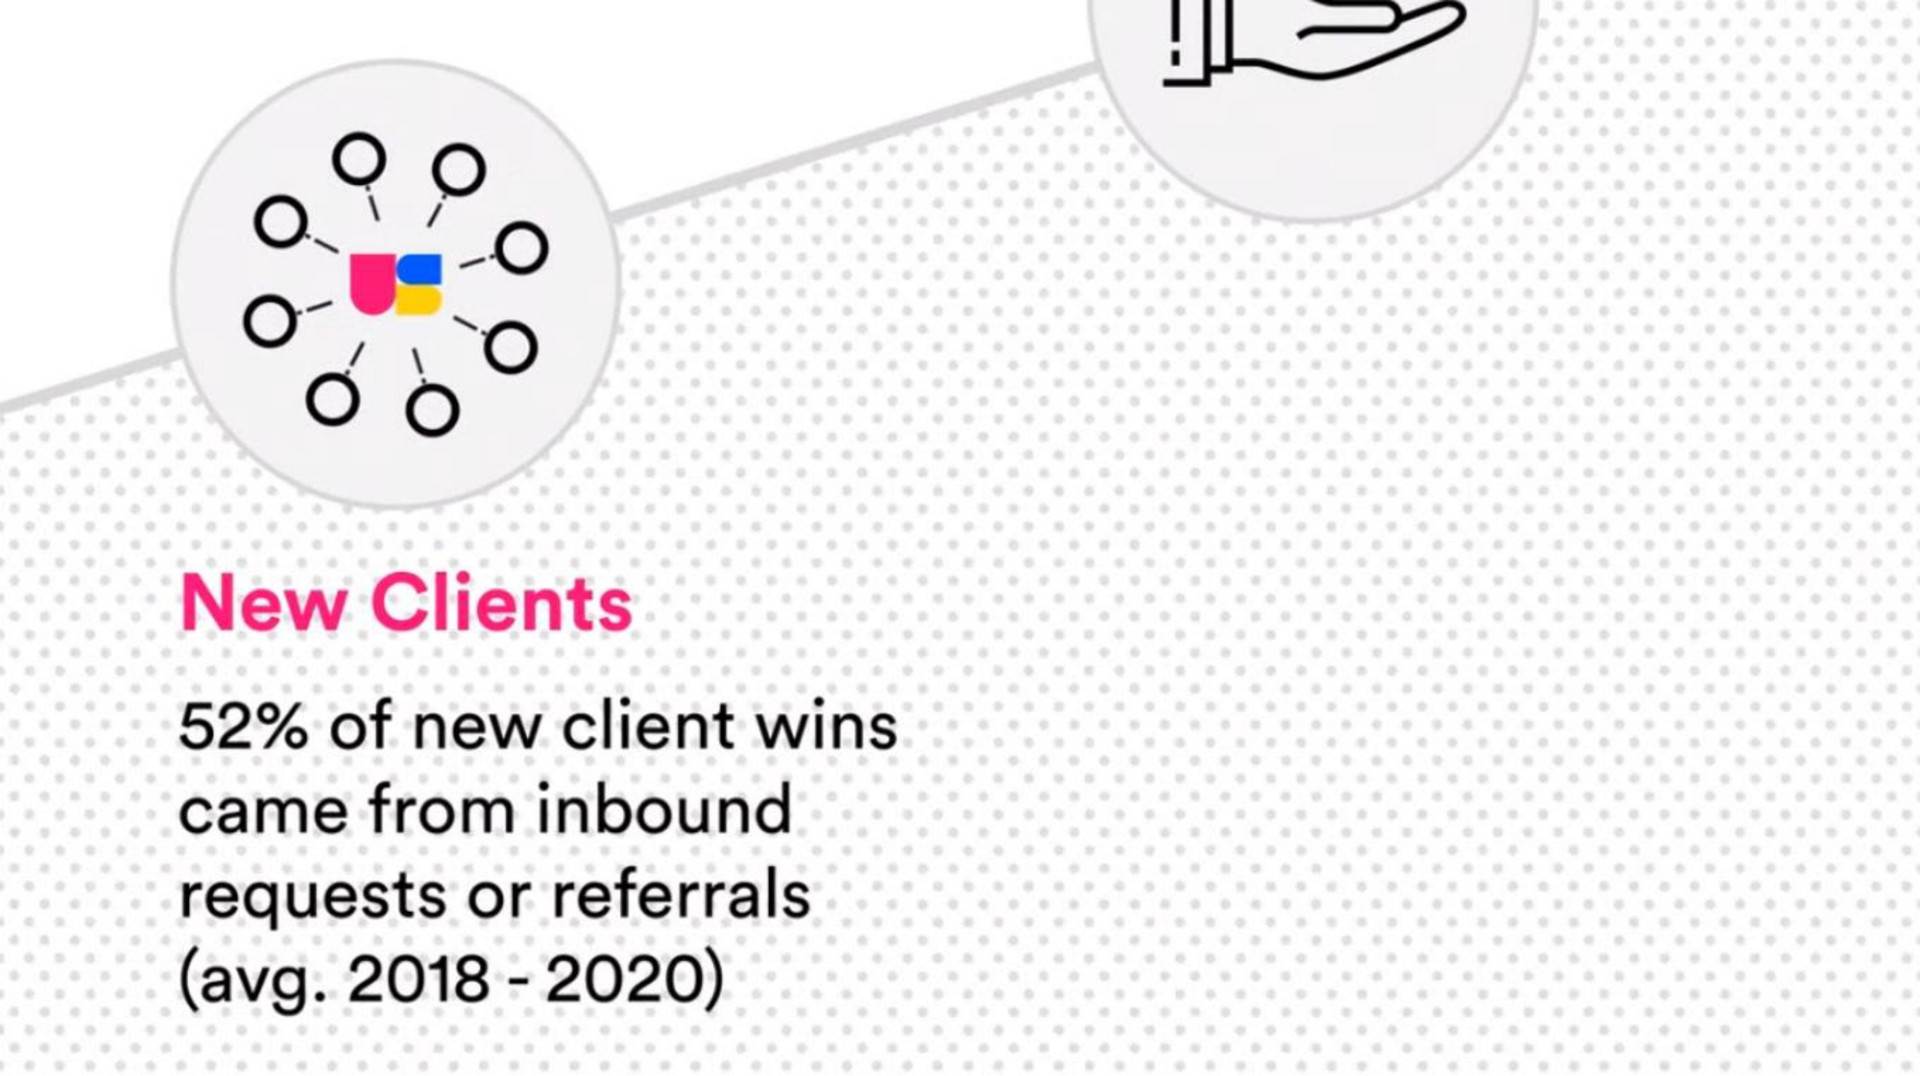 new clients of new client wins came from inbound requests or referrals | TaskUs